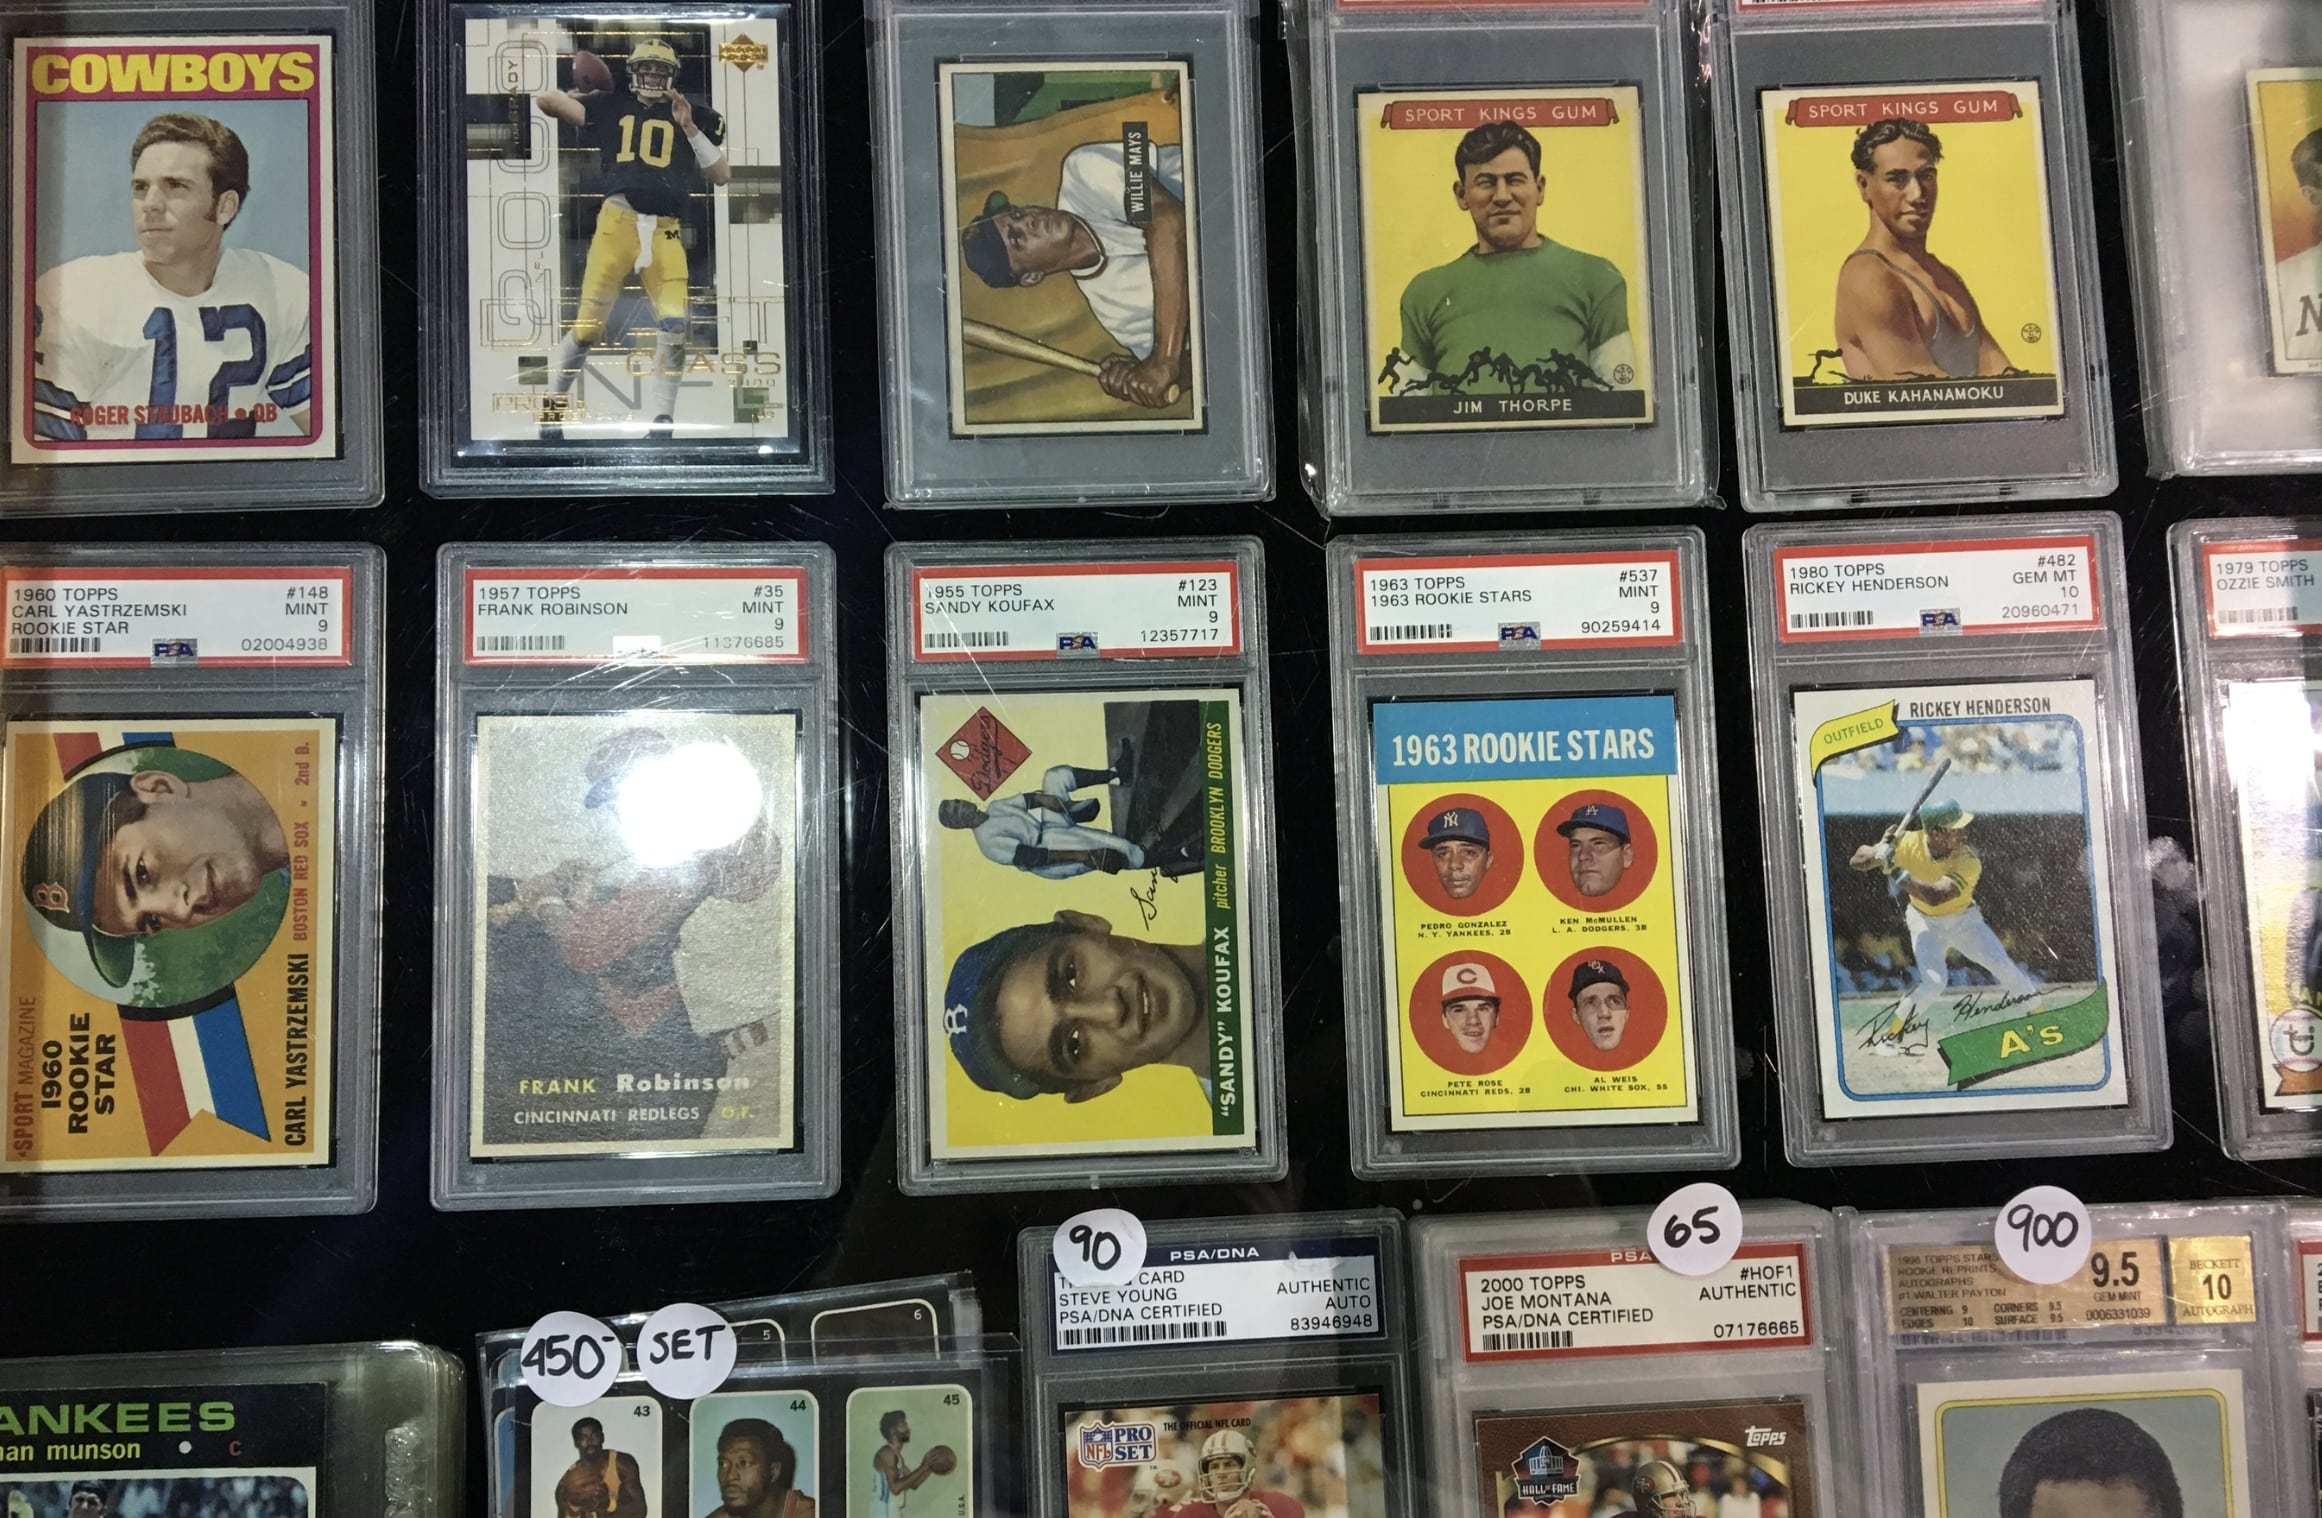 3 Best Tips To Find Baseball Card Shops Nearby - Old Sports Cards